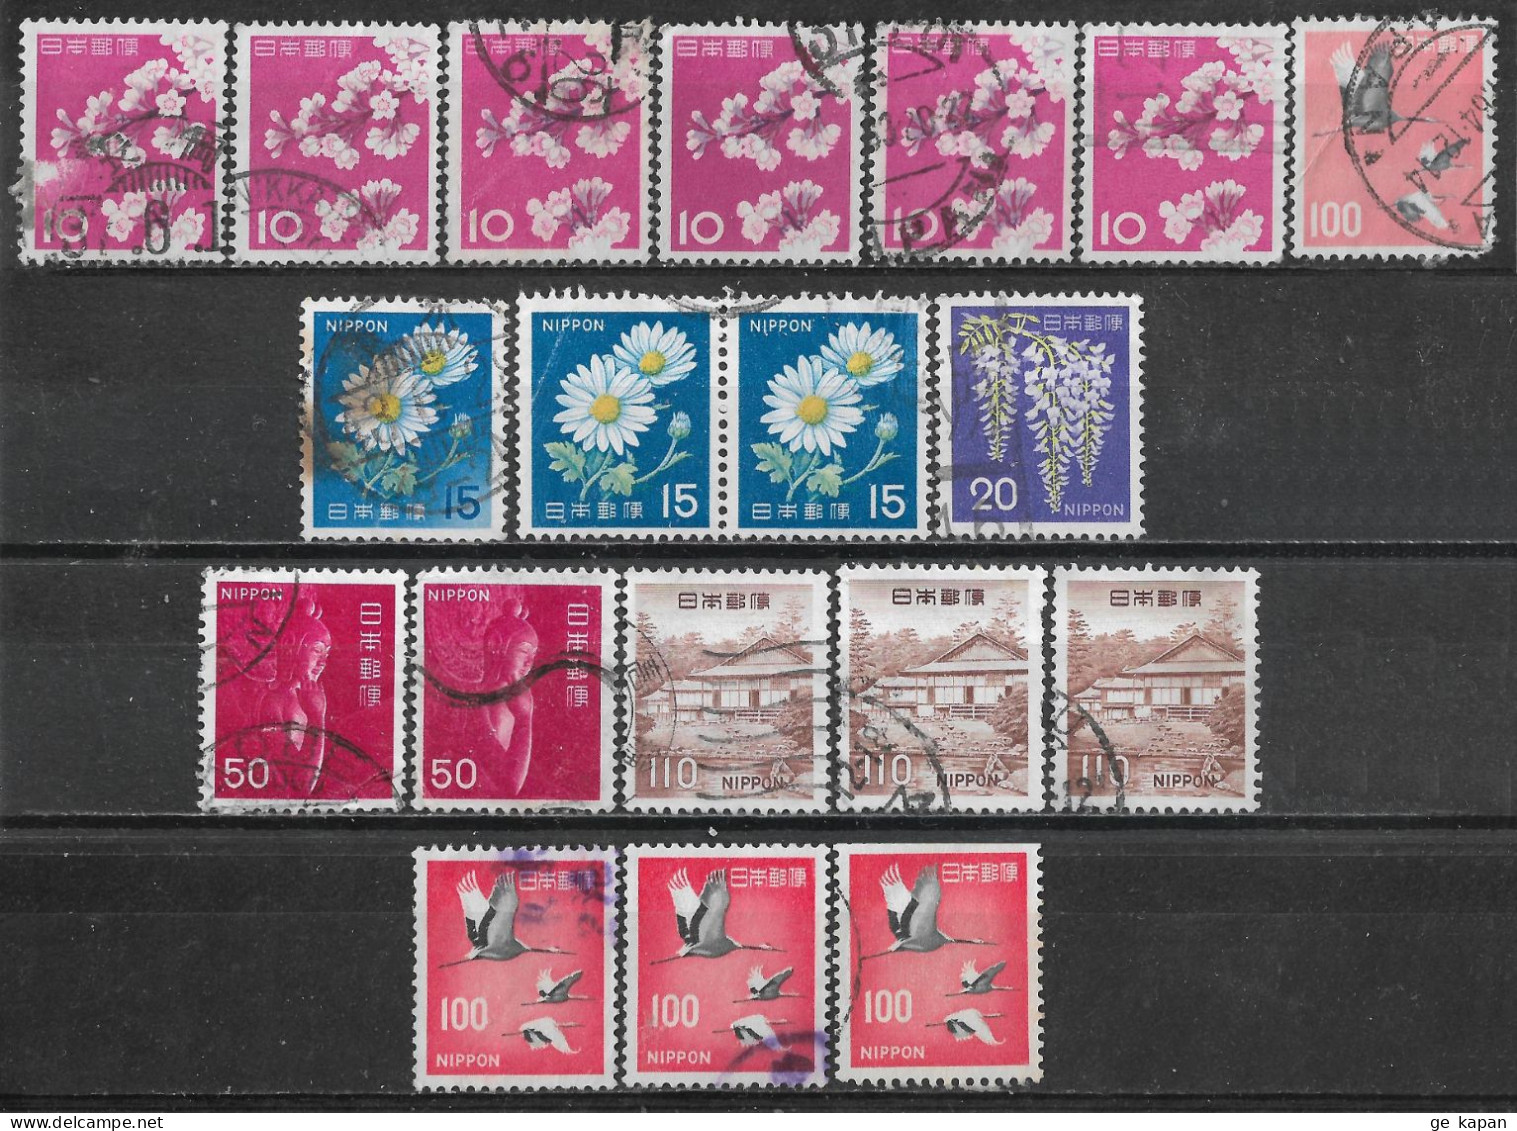 1961-1968 JAPAN Set Of 19 Used Stamps (Michel # 758A,764,930A,931A,932,937,943,1007A) CV €4.70 - Usados